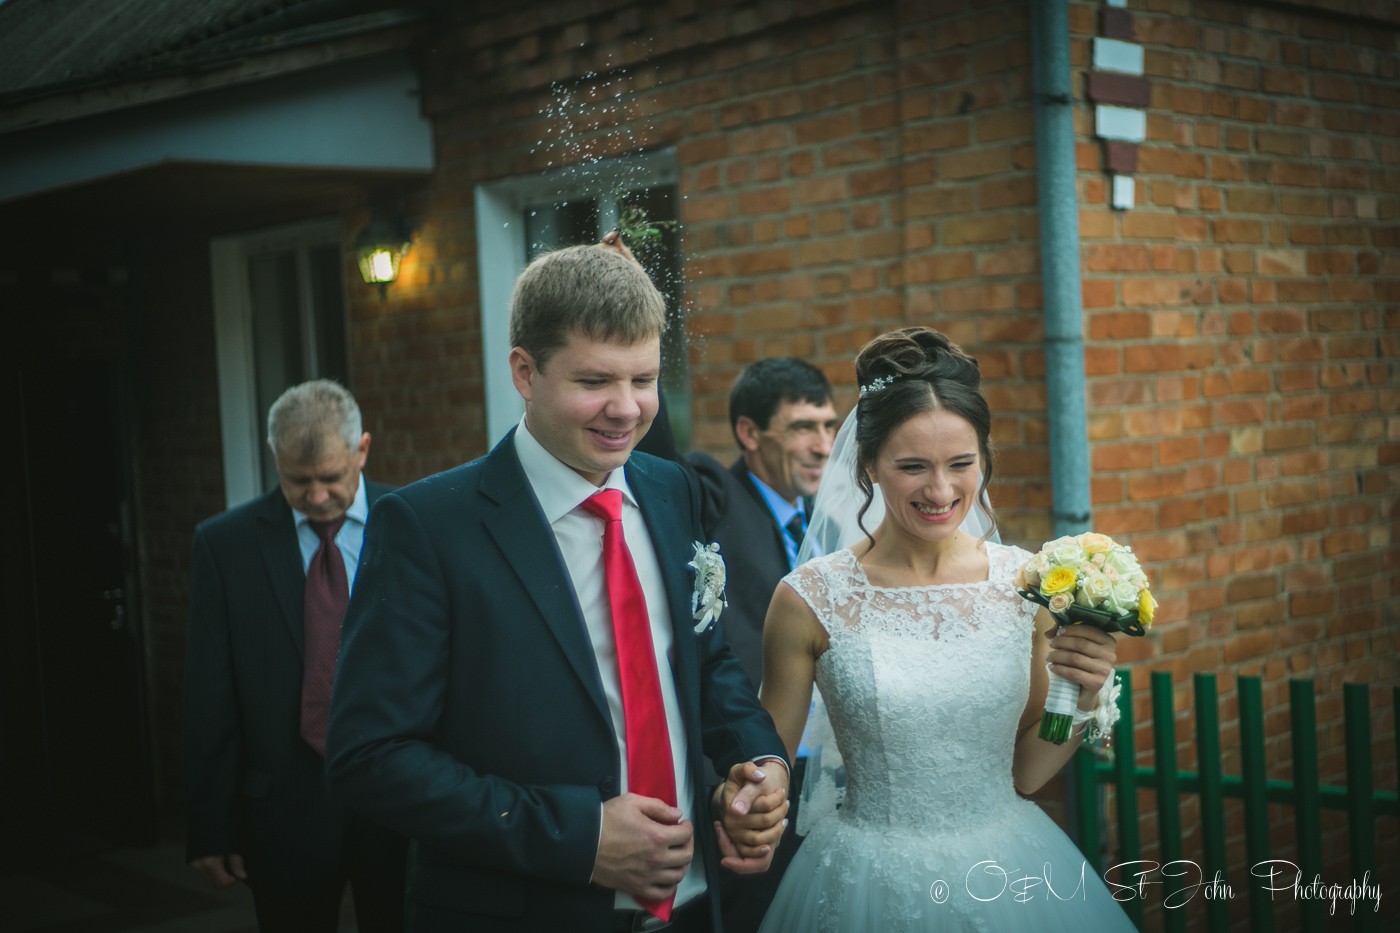 My cousin (groom) leaving the house with his bride. Ukraine Wedding Tradition